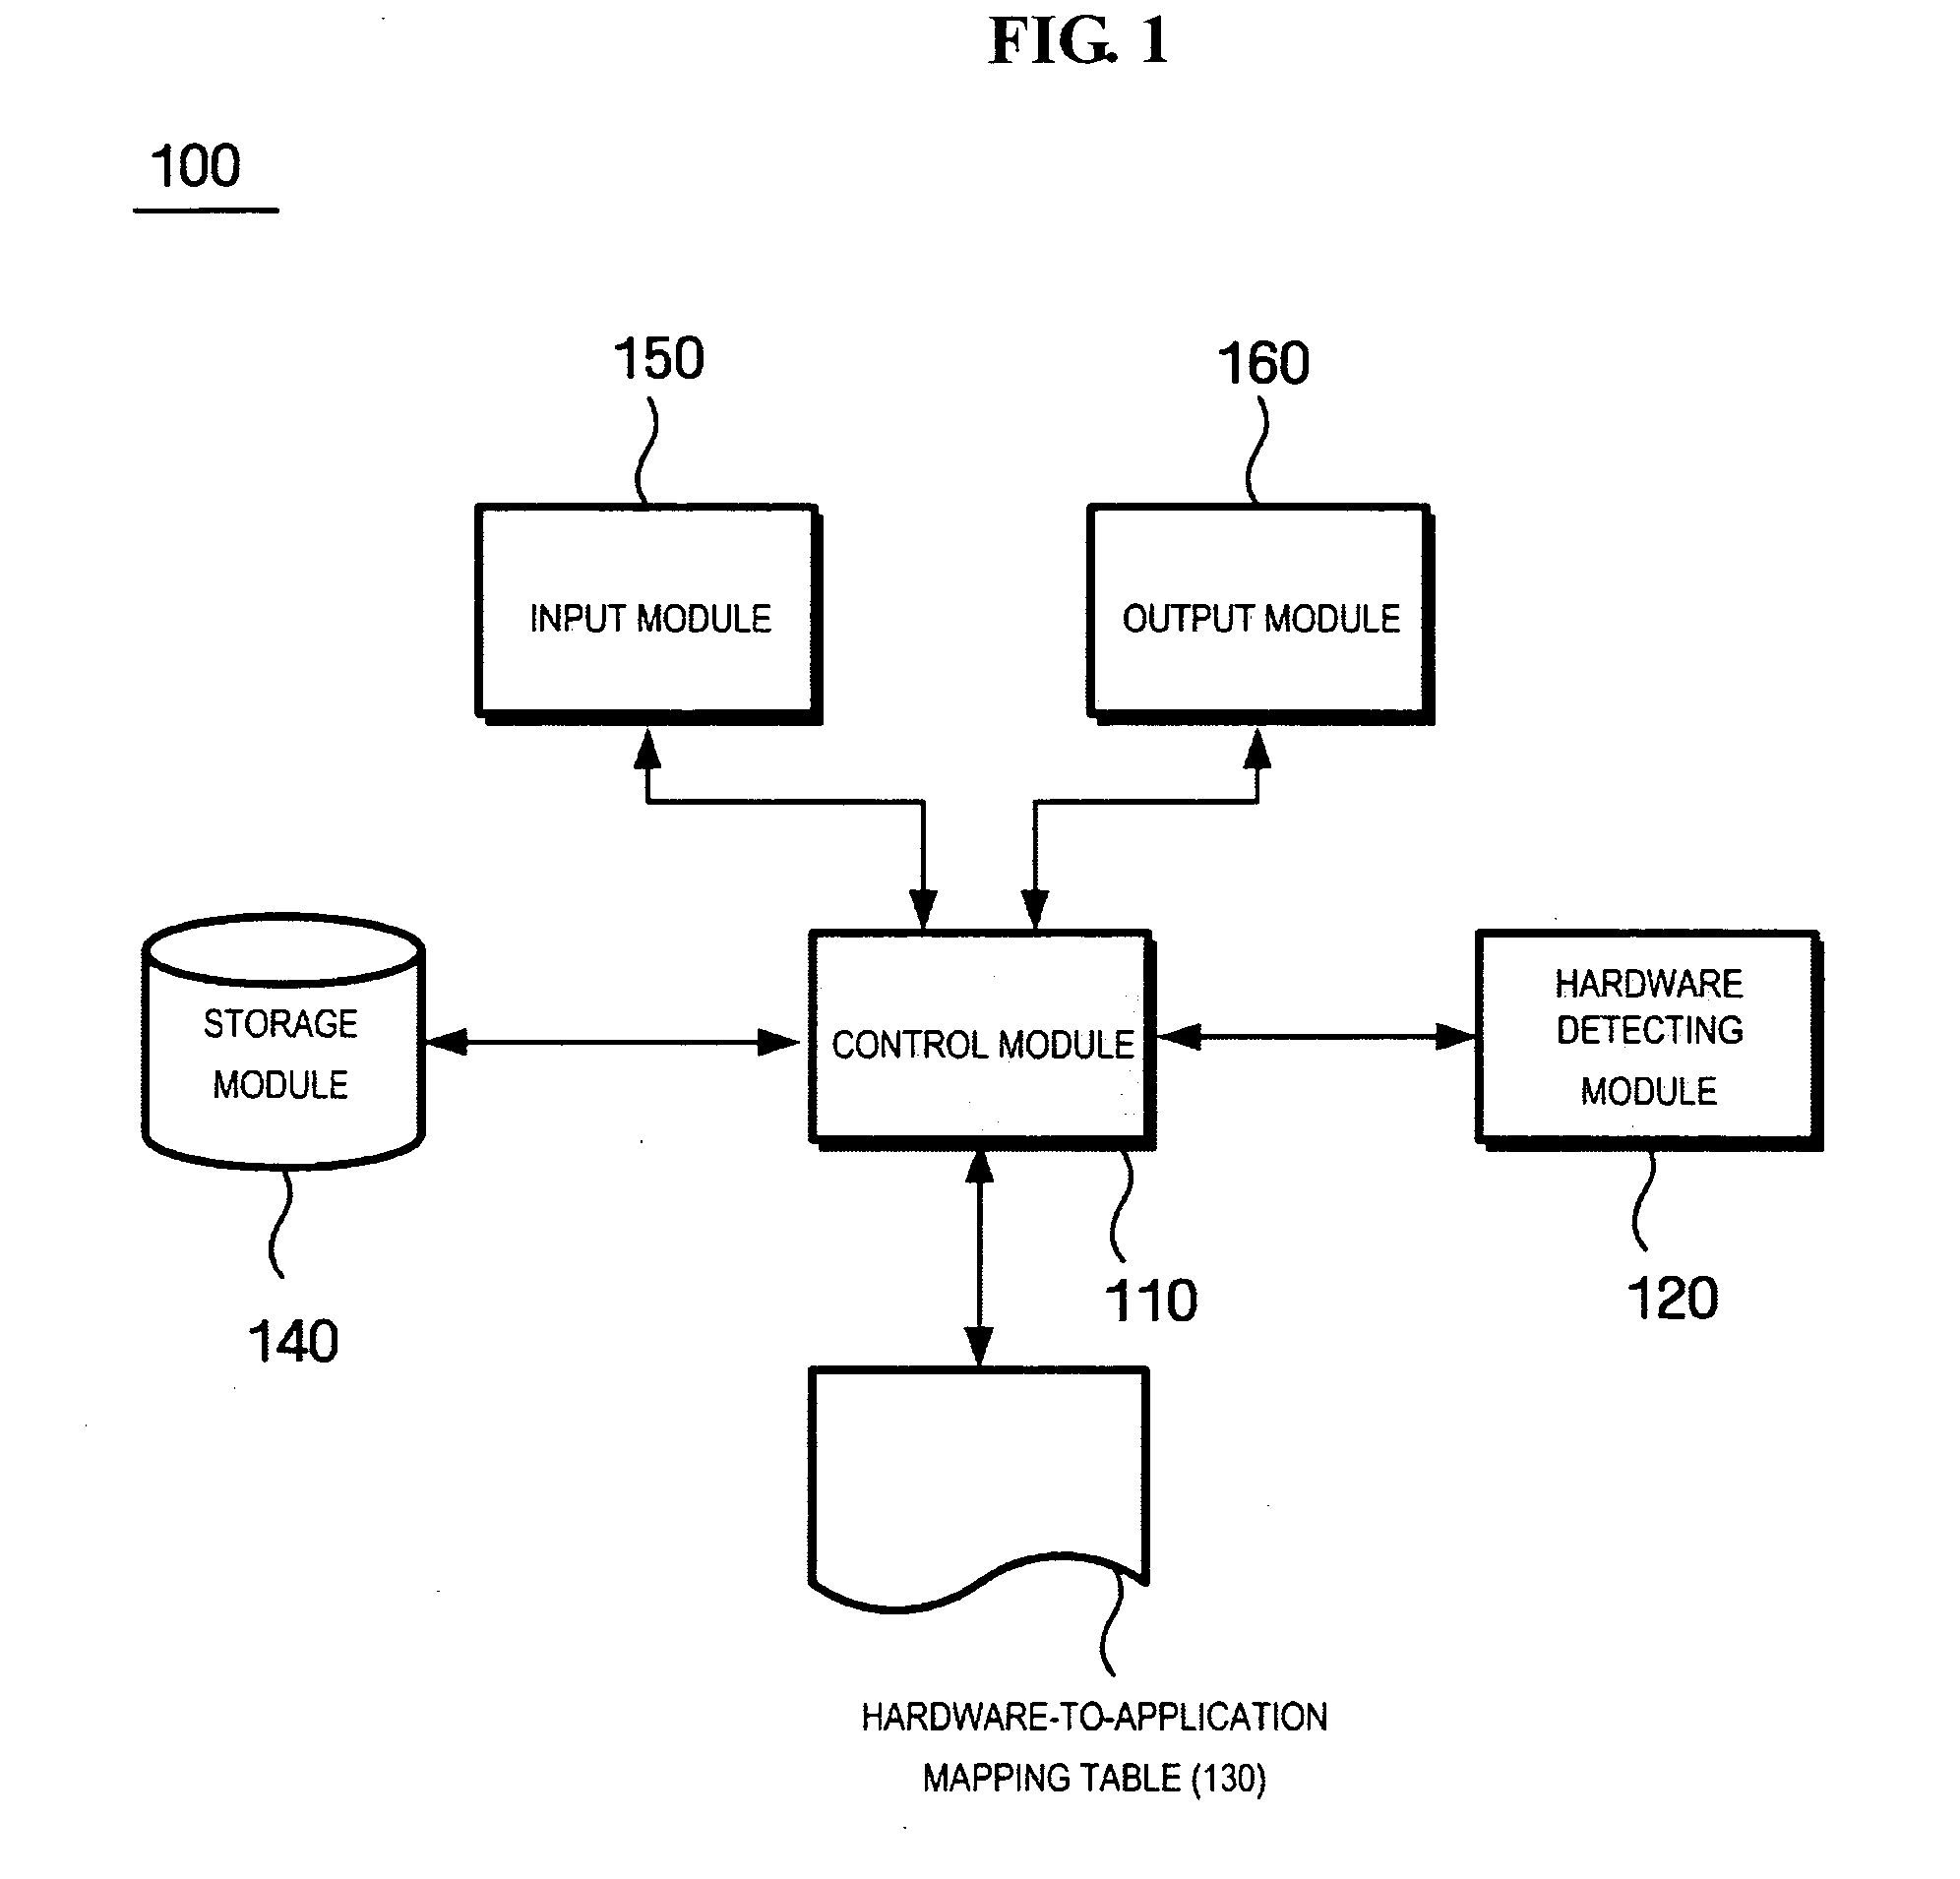 Plug and install system and method